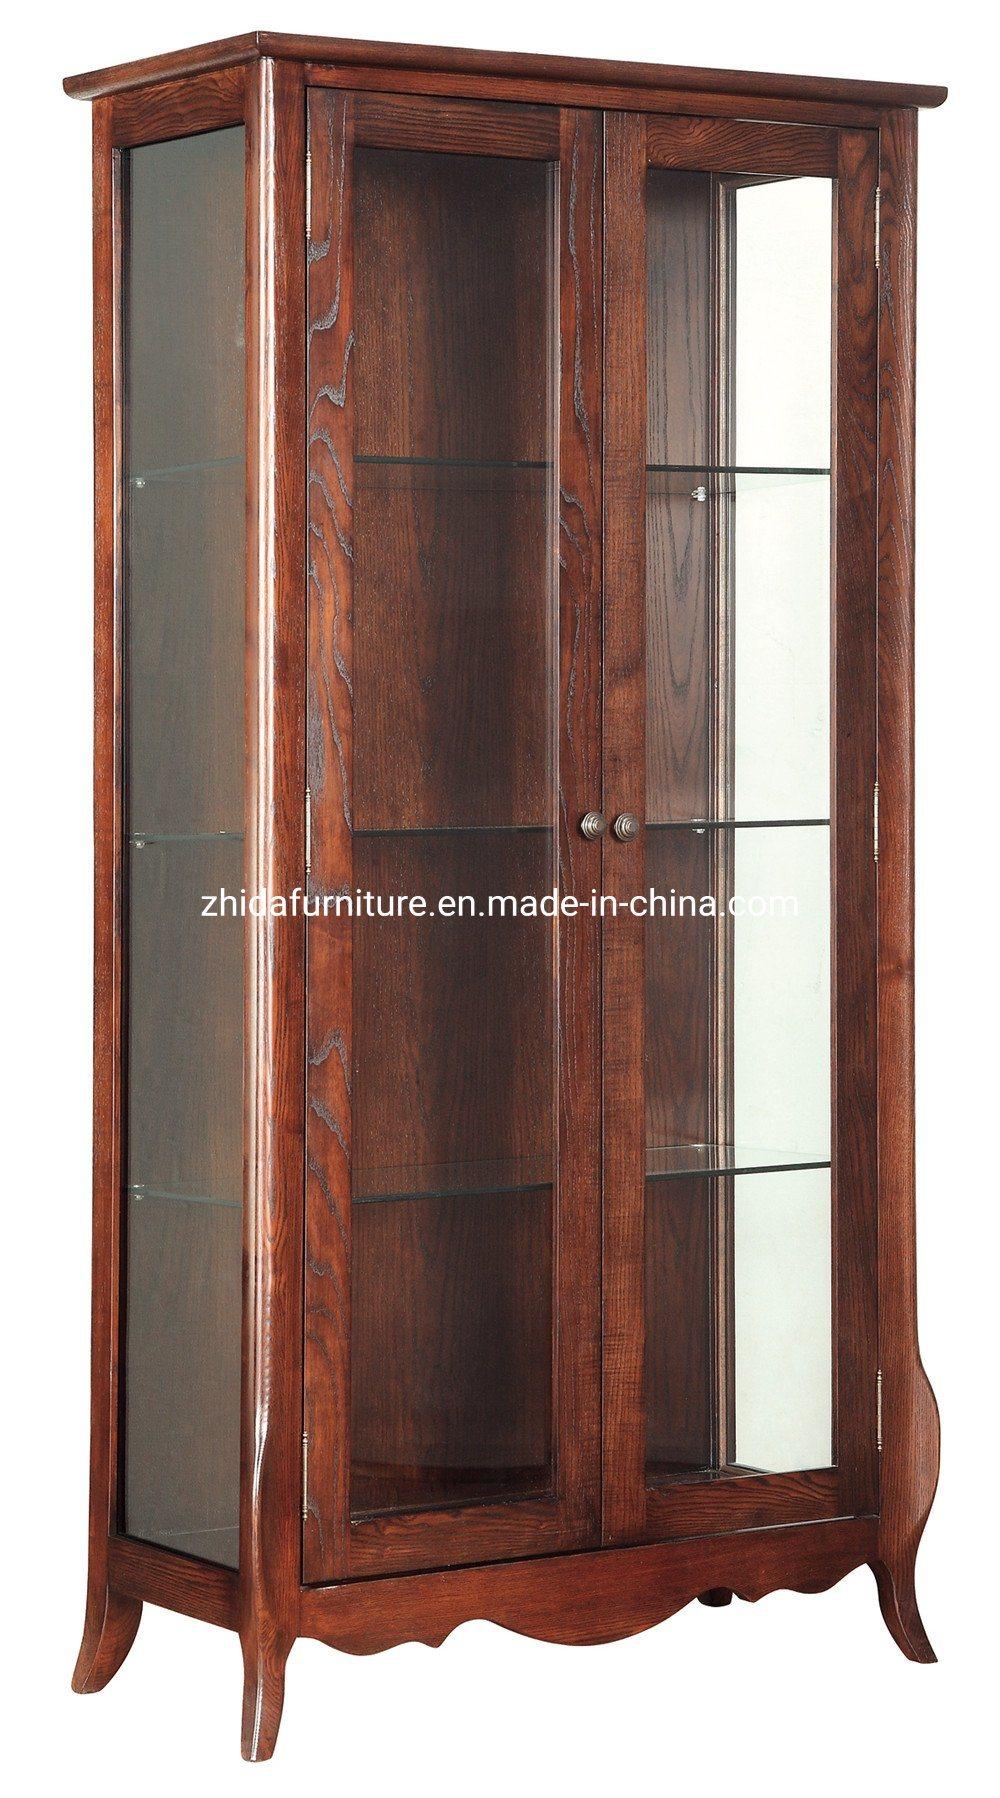 Home Furniture Living Room Wooden Wine Cabinet with Glass